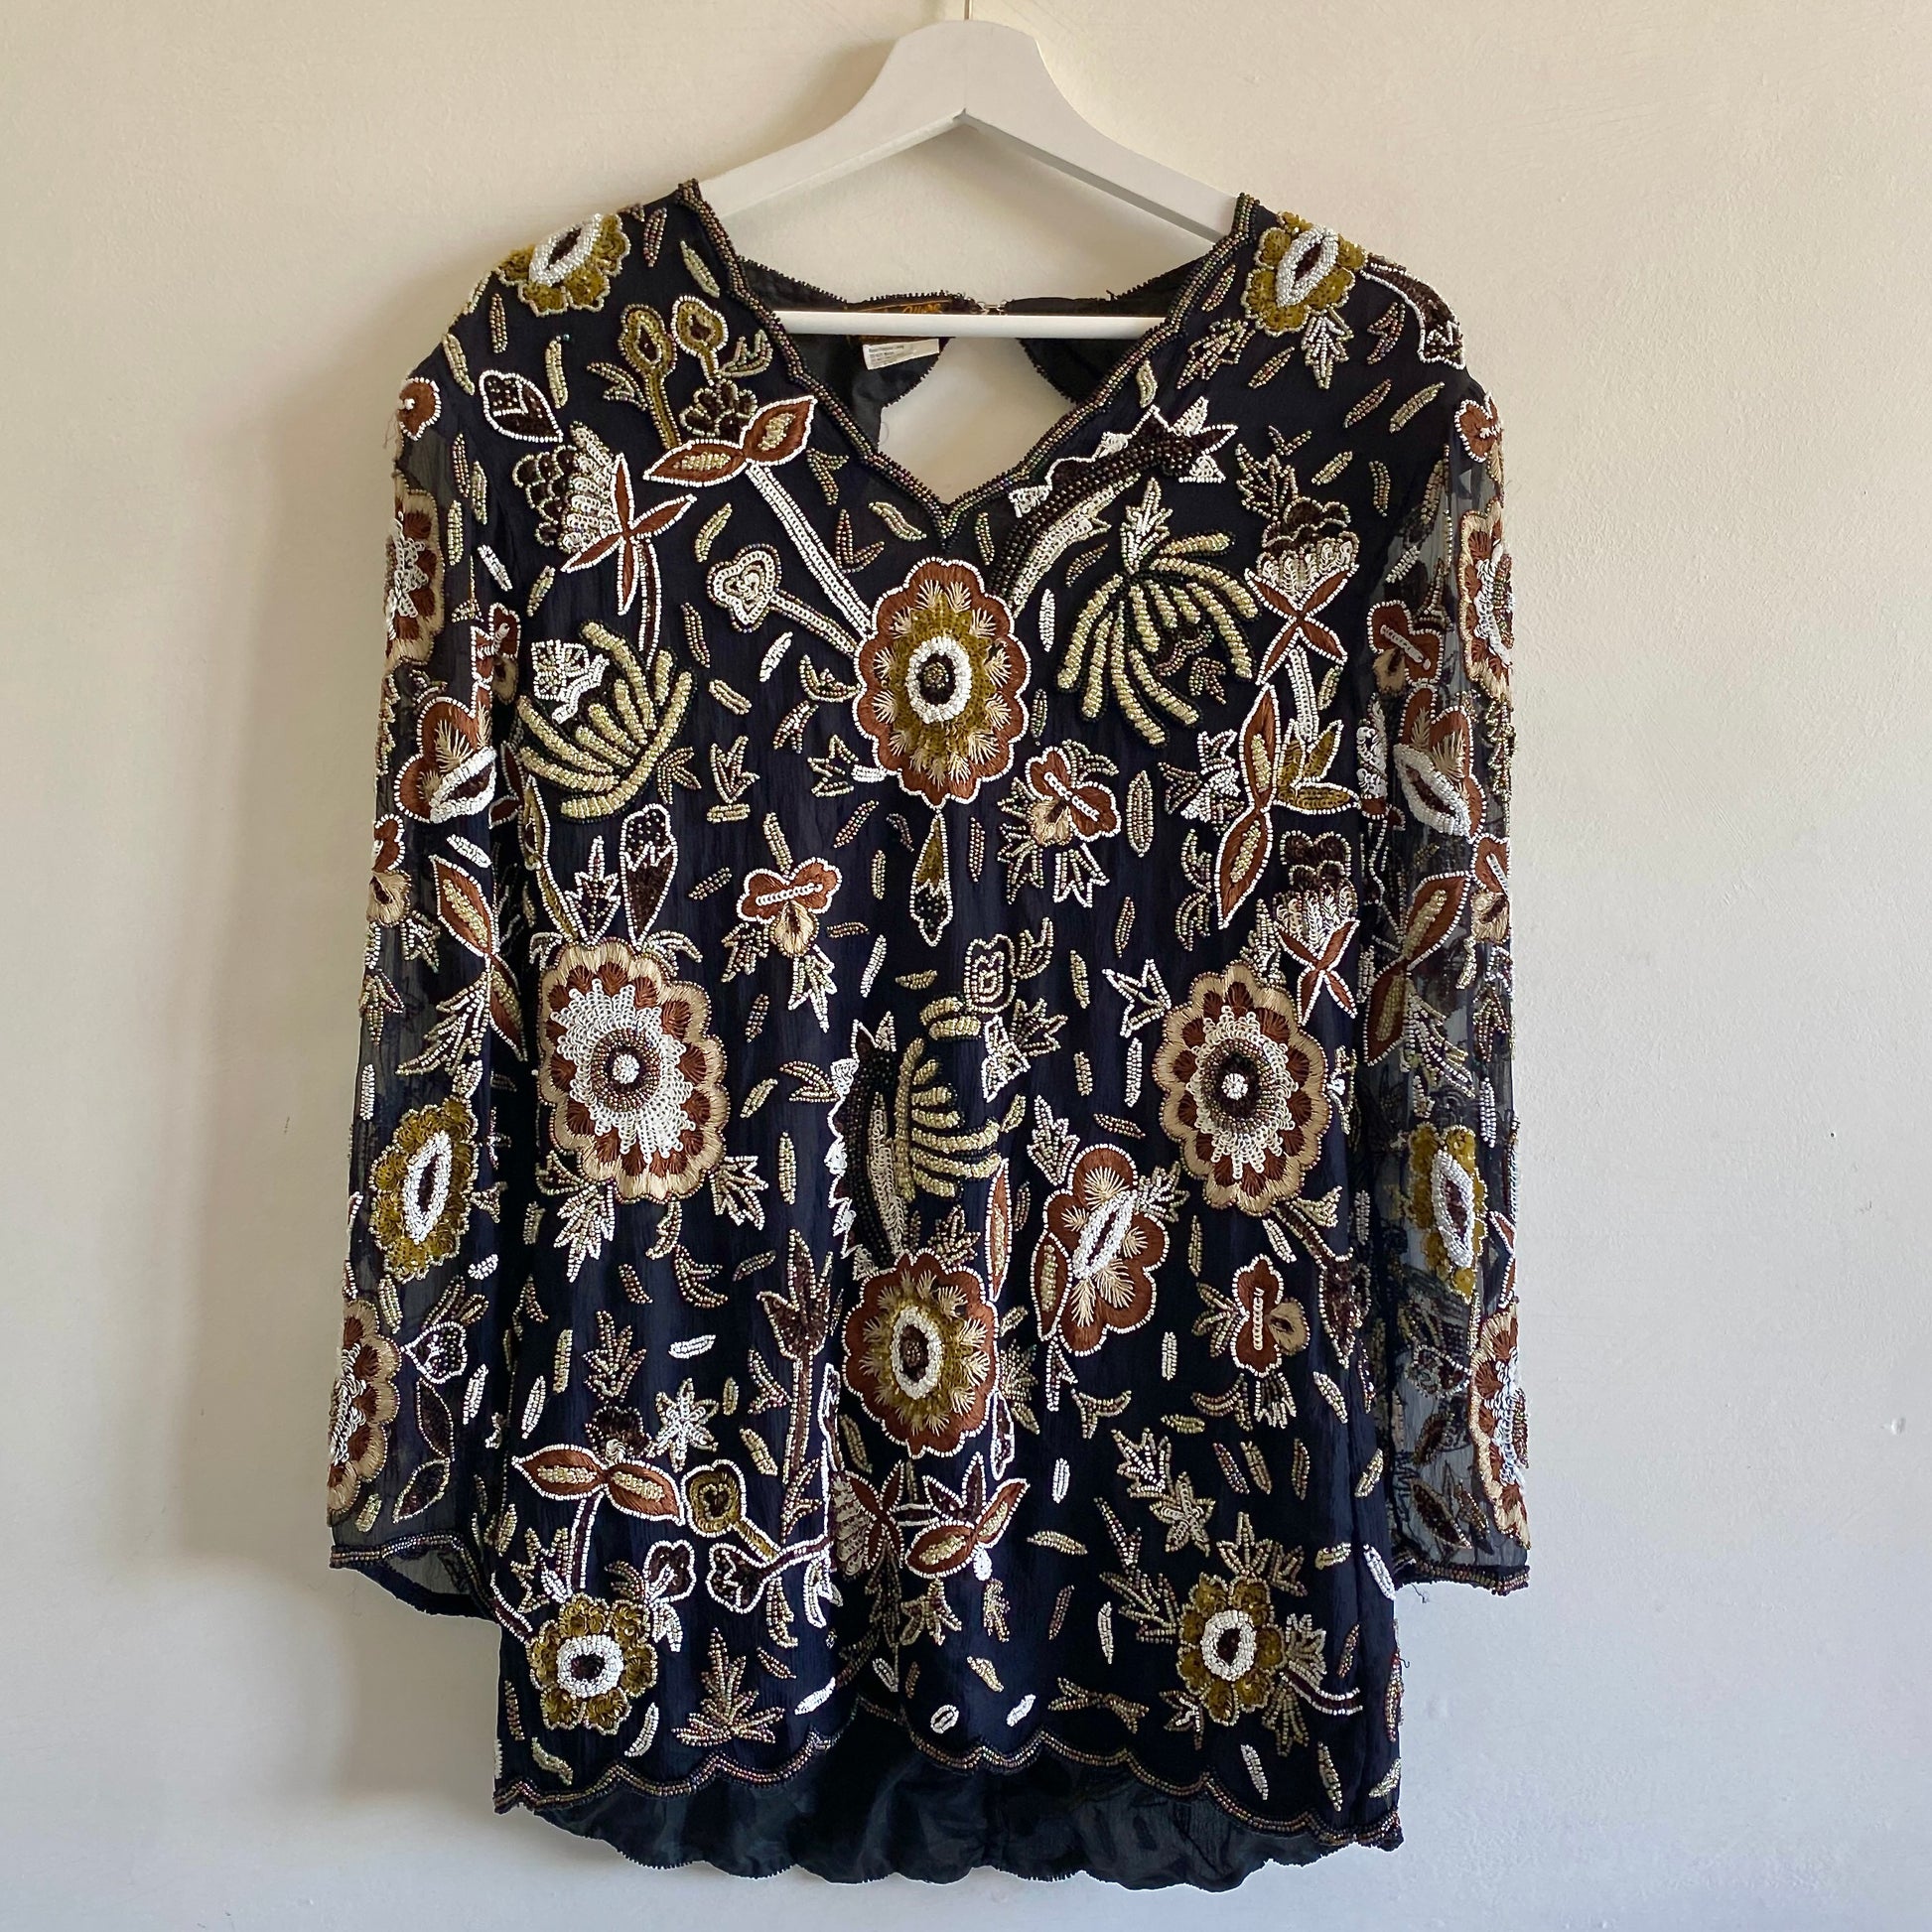 80s heavy beaded vintage silk top By Eve's Allure V neckline Open backed with zip and hook fastening at nape Shoulder pads Body fully lined 100% Silk with polyester lining Vintage size M